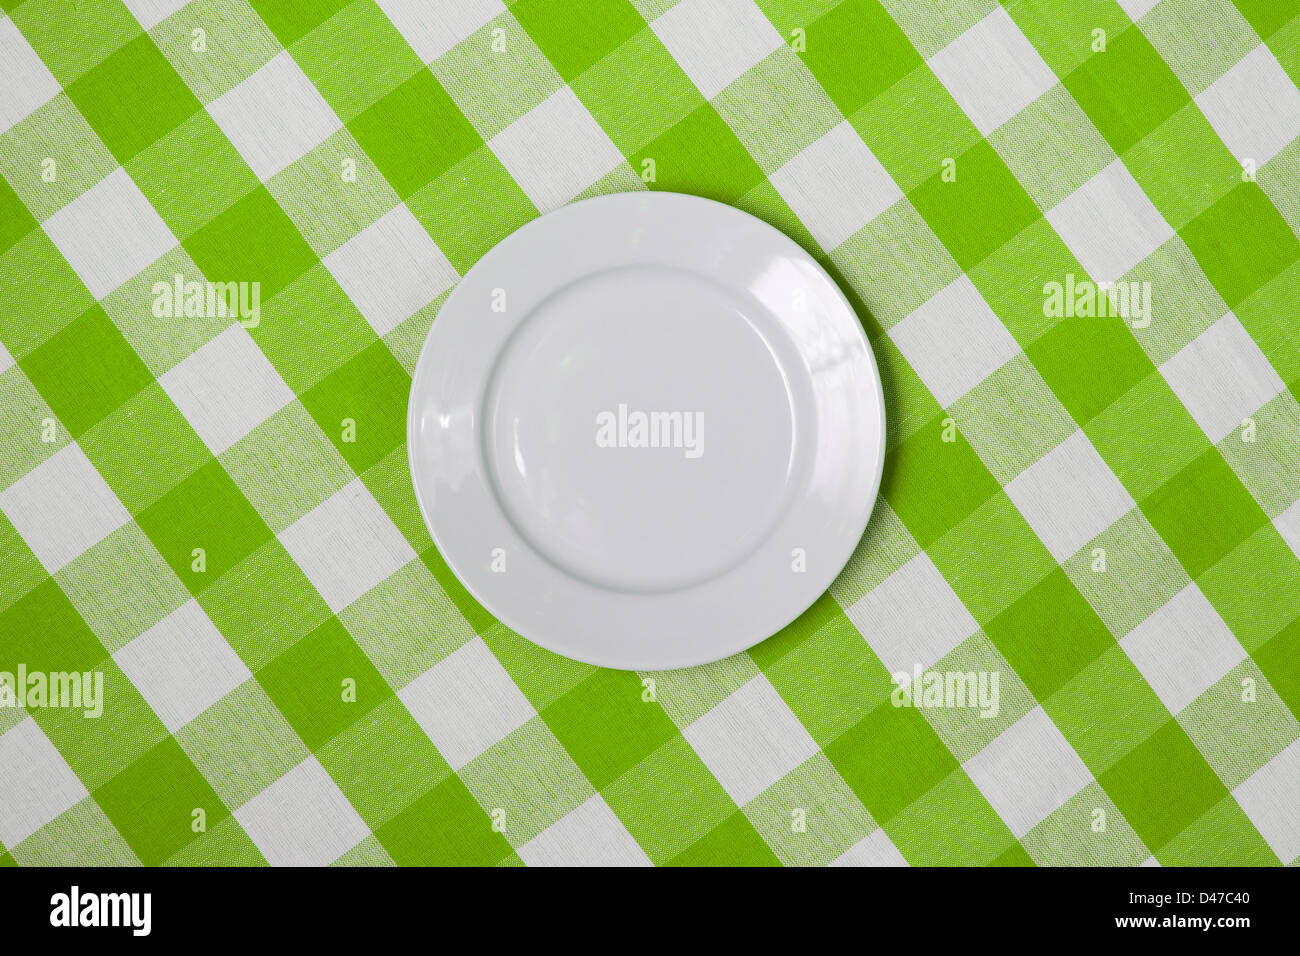 white round plate on green checked tablecloth Stock Photo